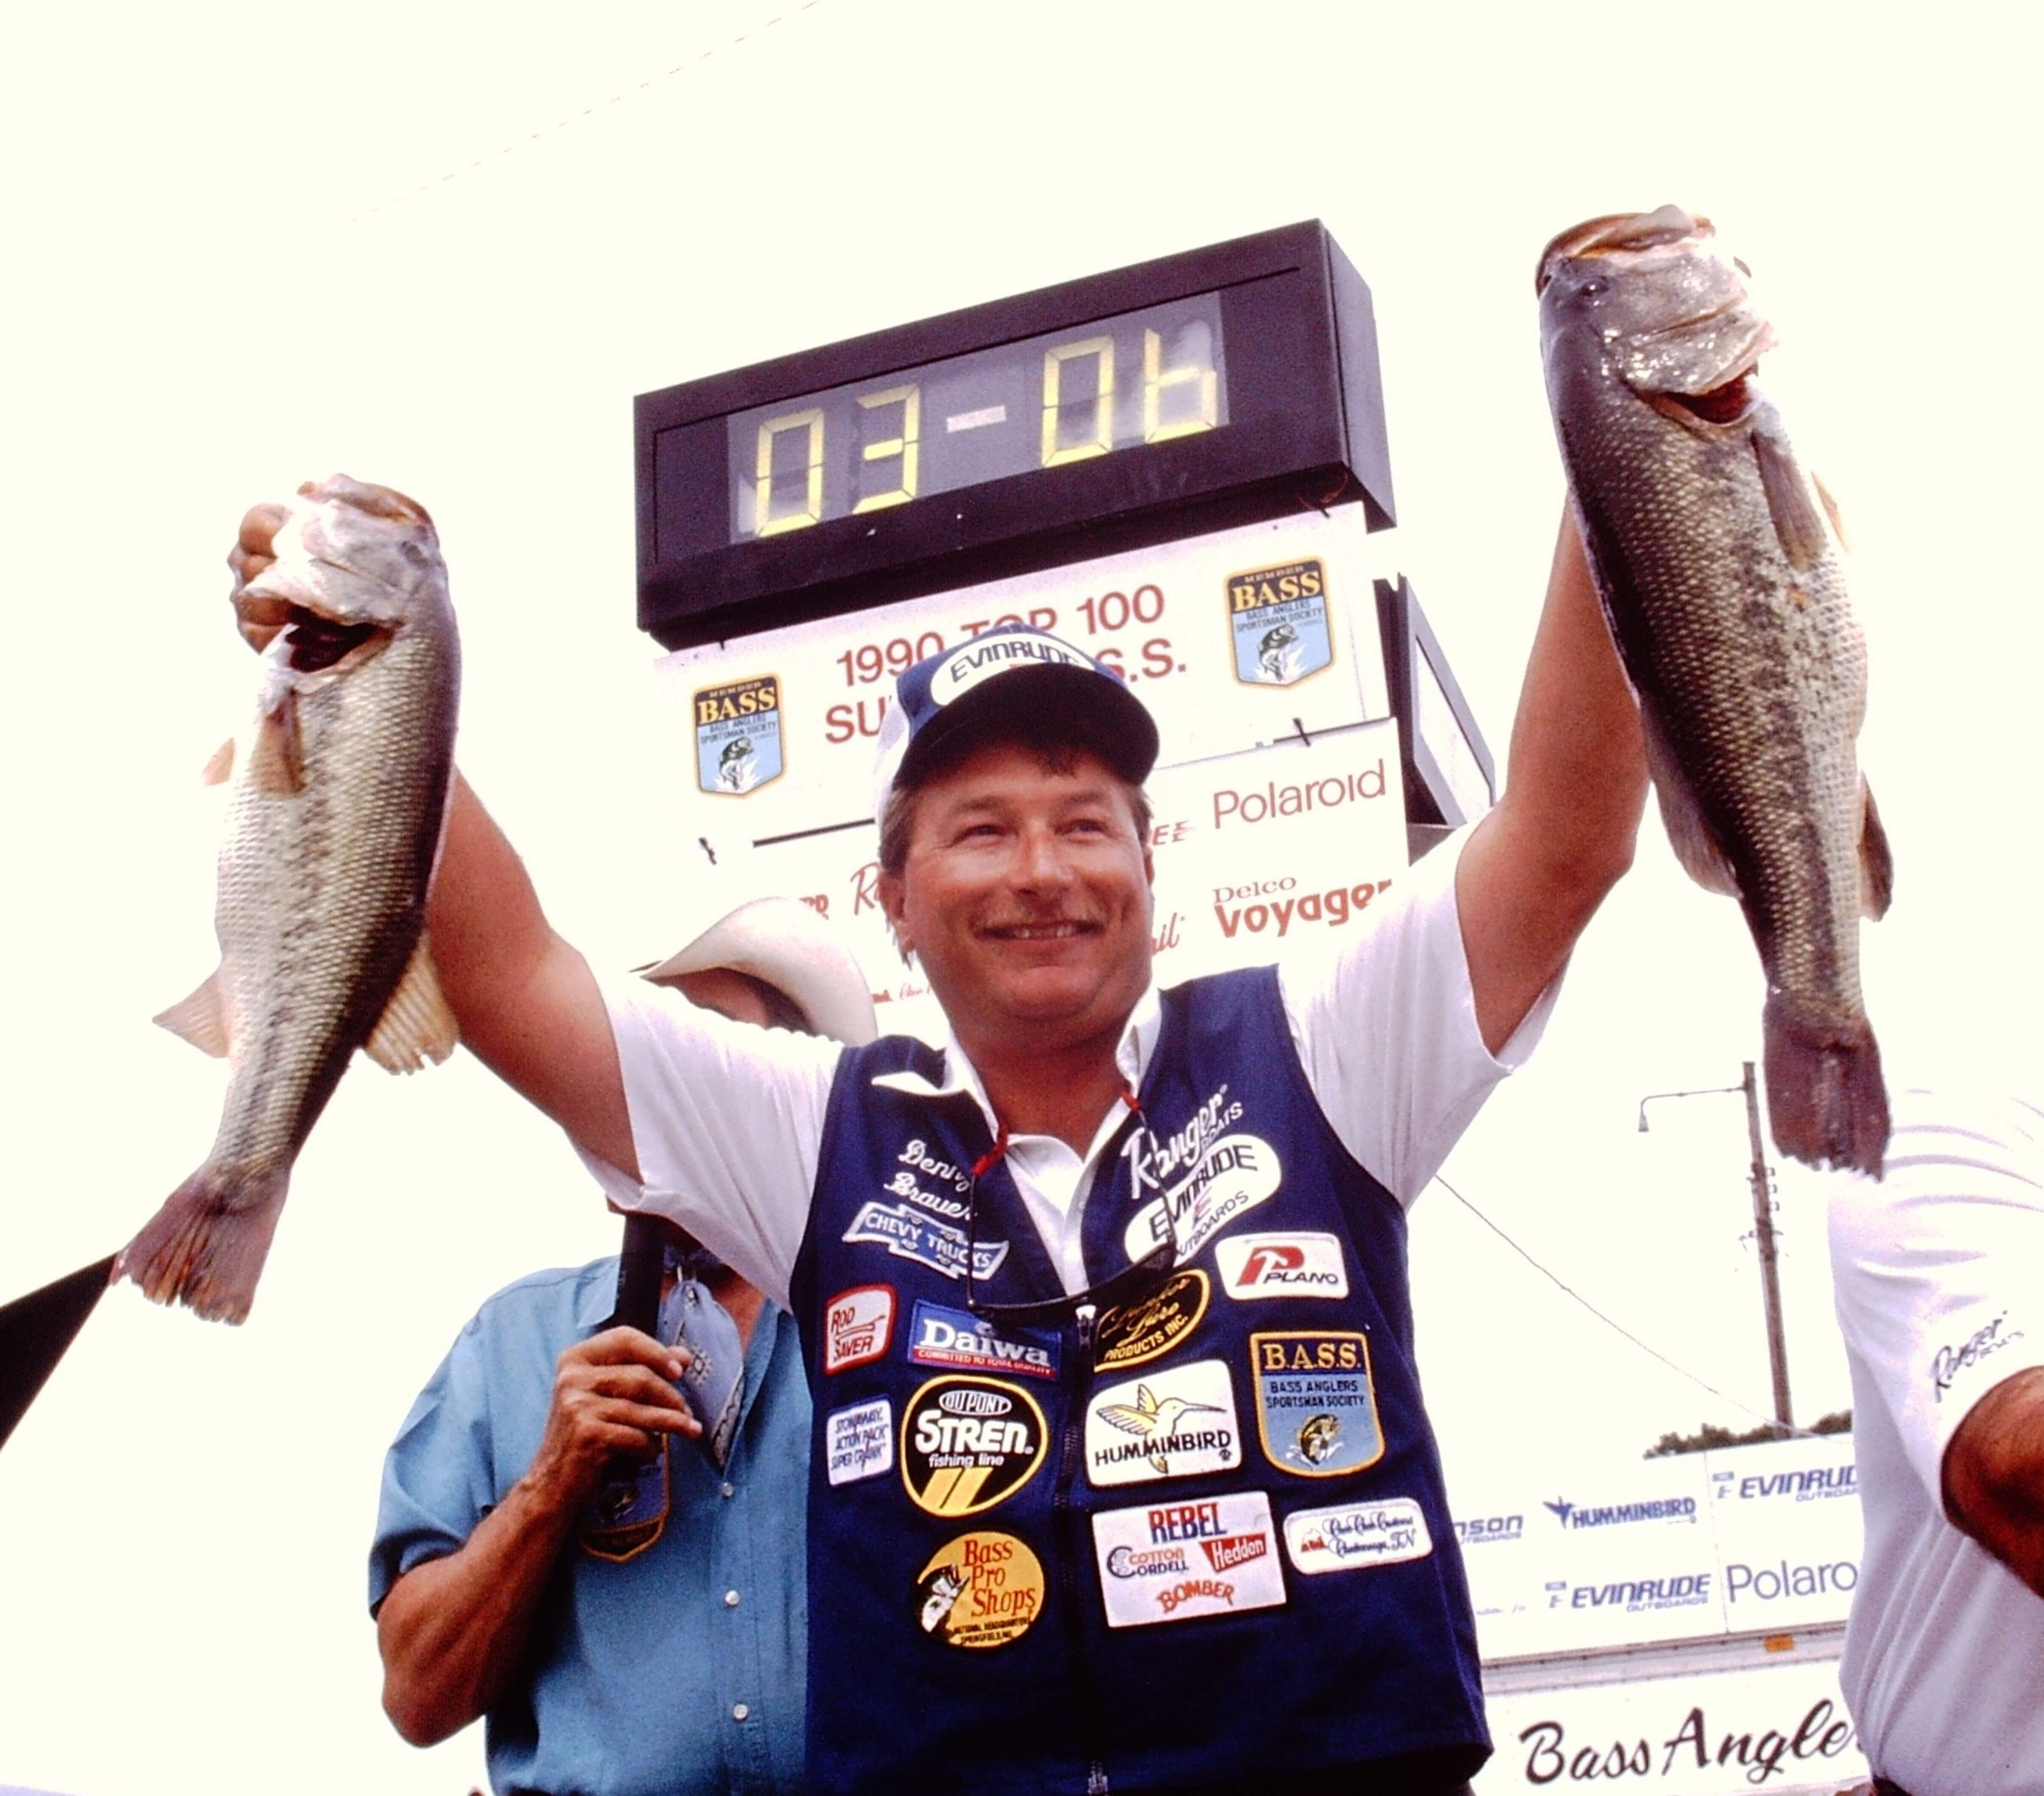 After the Classic, it was four years before B.A.S.S. made another appearance on Chickamauga. The Tennessee Top 100 Super B.A.S.S. Pro-Am was held May 9-12, 1990, and Denny Brauer won it again. He caught 72-11 over four days (seven-bass limits were in play). He was returning after missing two tournaments during his recovery from major back surgery.